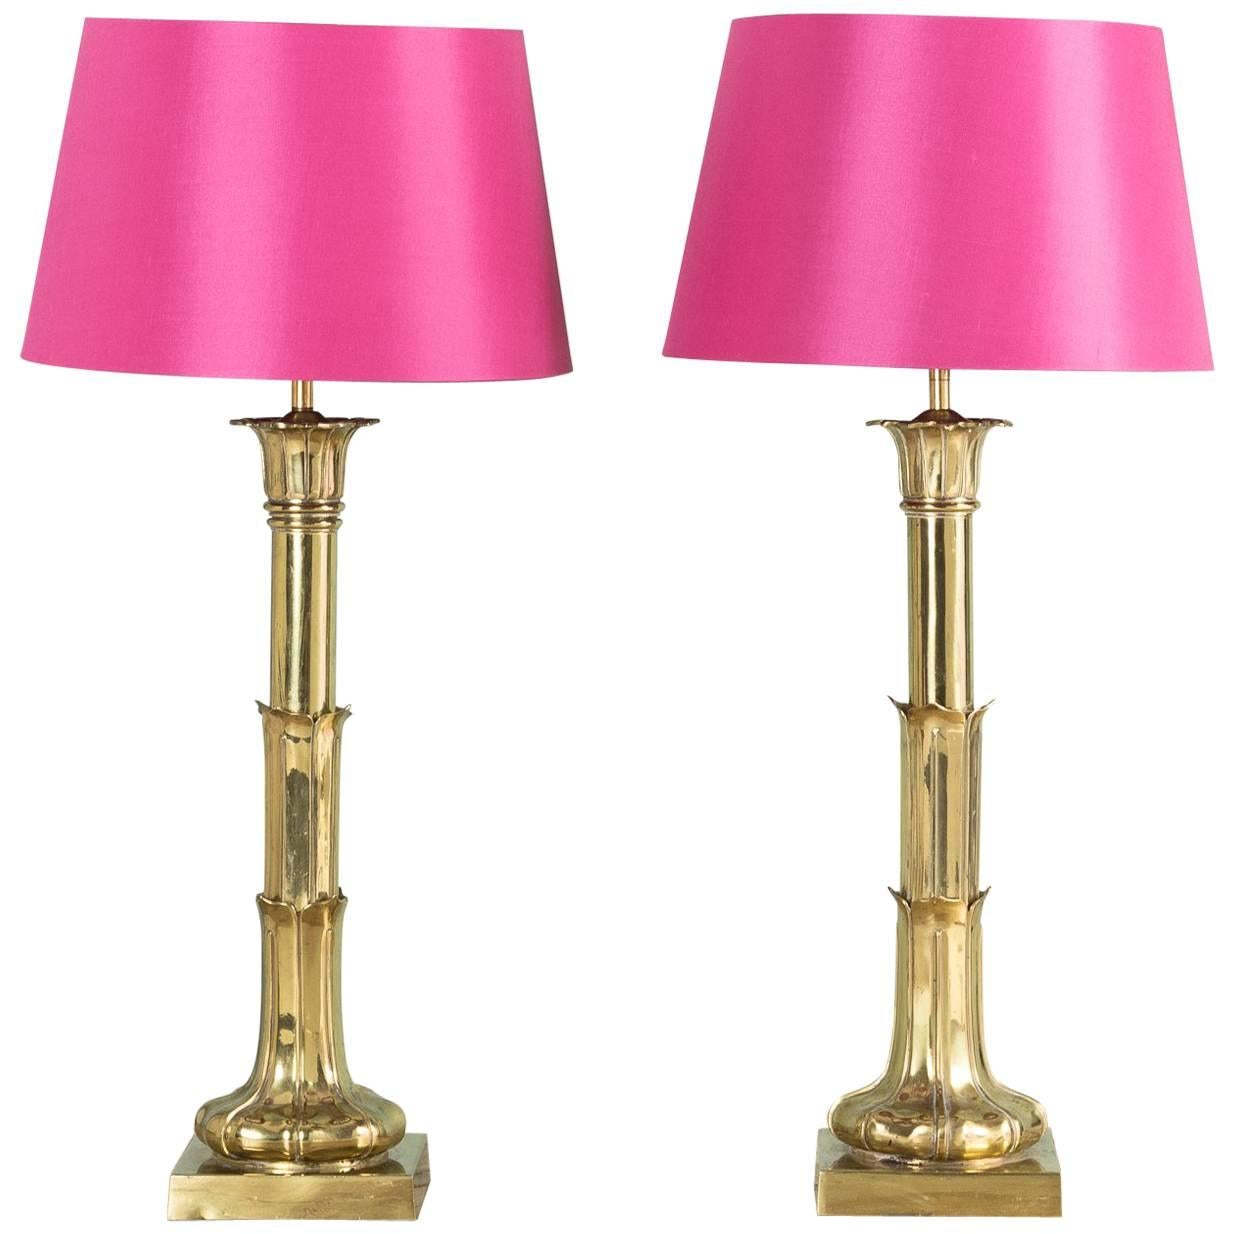 Pair of Nineteenth Century Brass Table Lamps